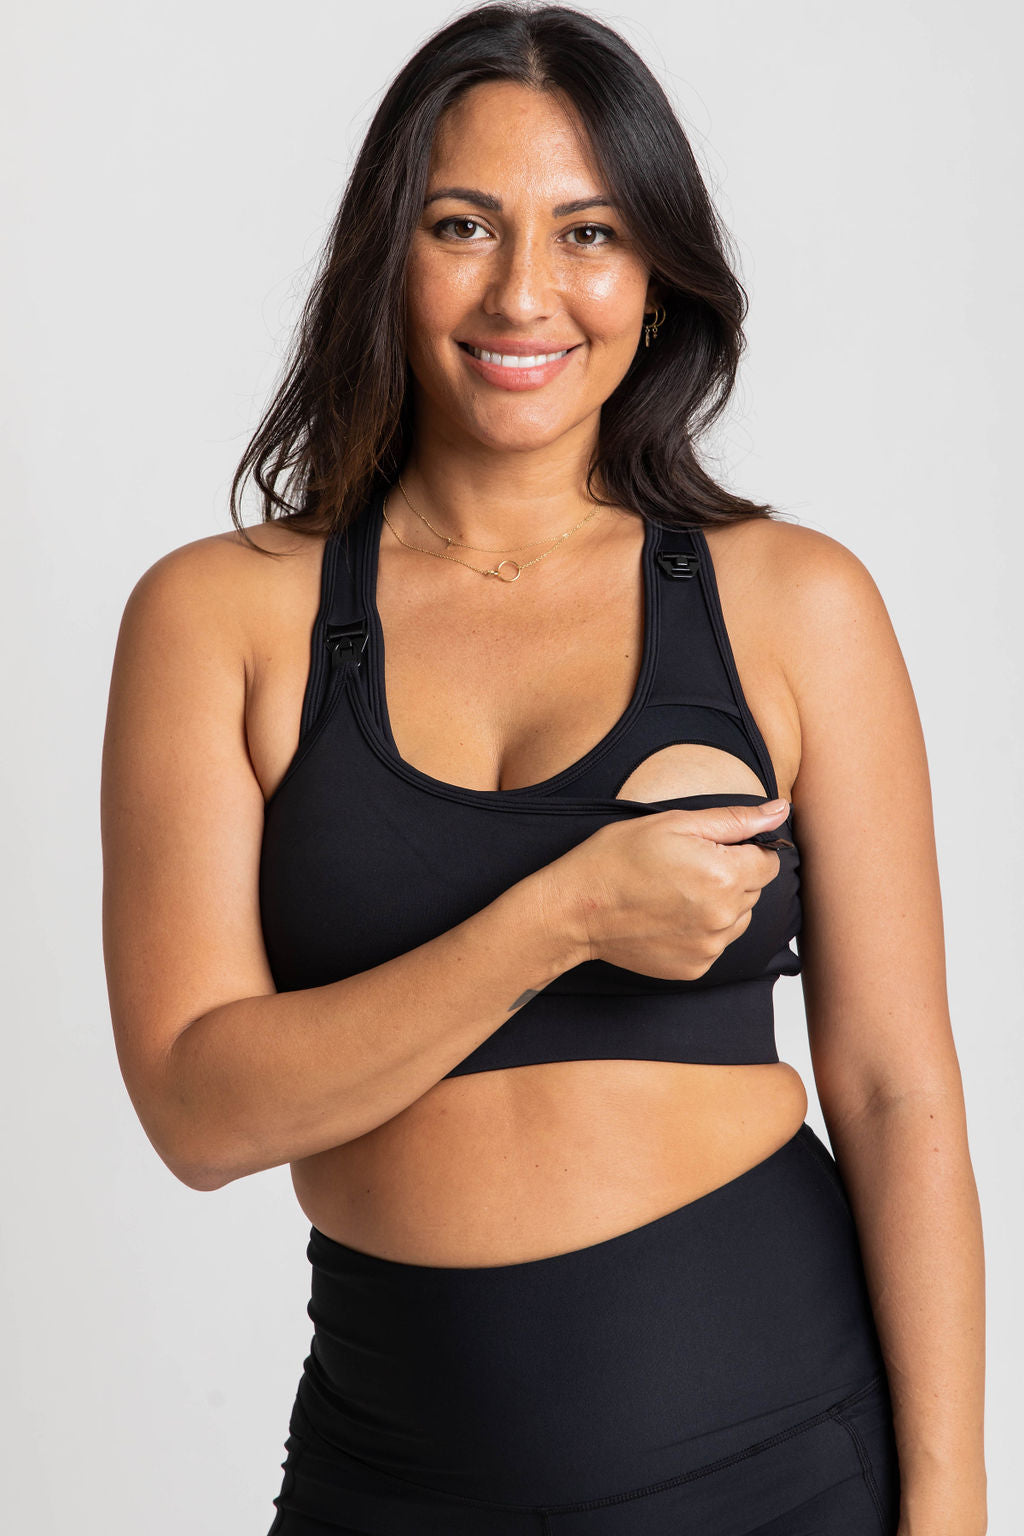 Did you know we make more than just nursing bras⁉️ Our invincible bra is  perfect for any workout including your favorite H.I.I.T cl